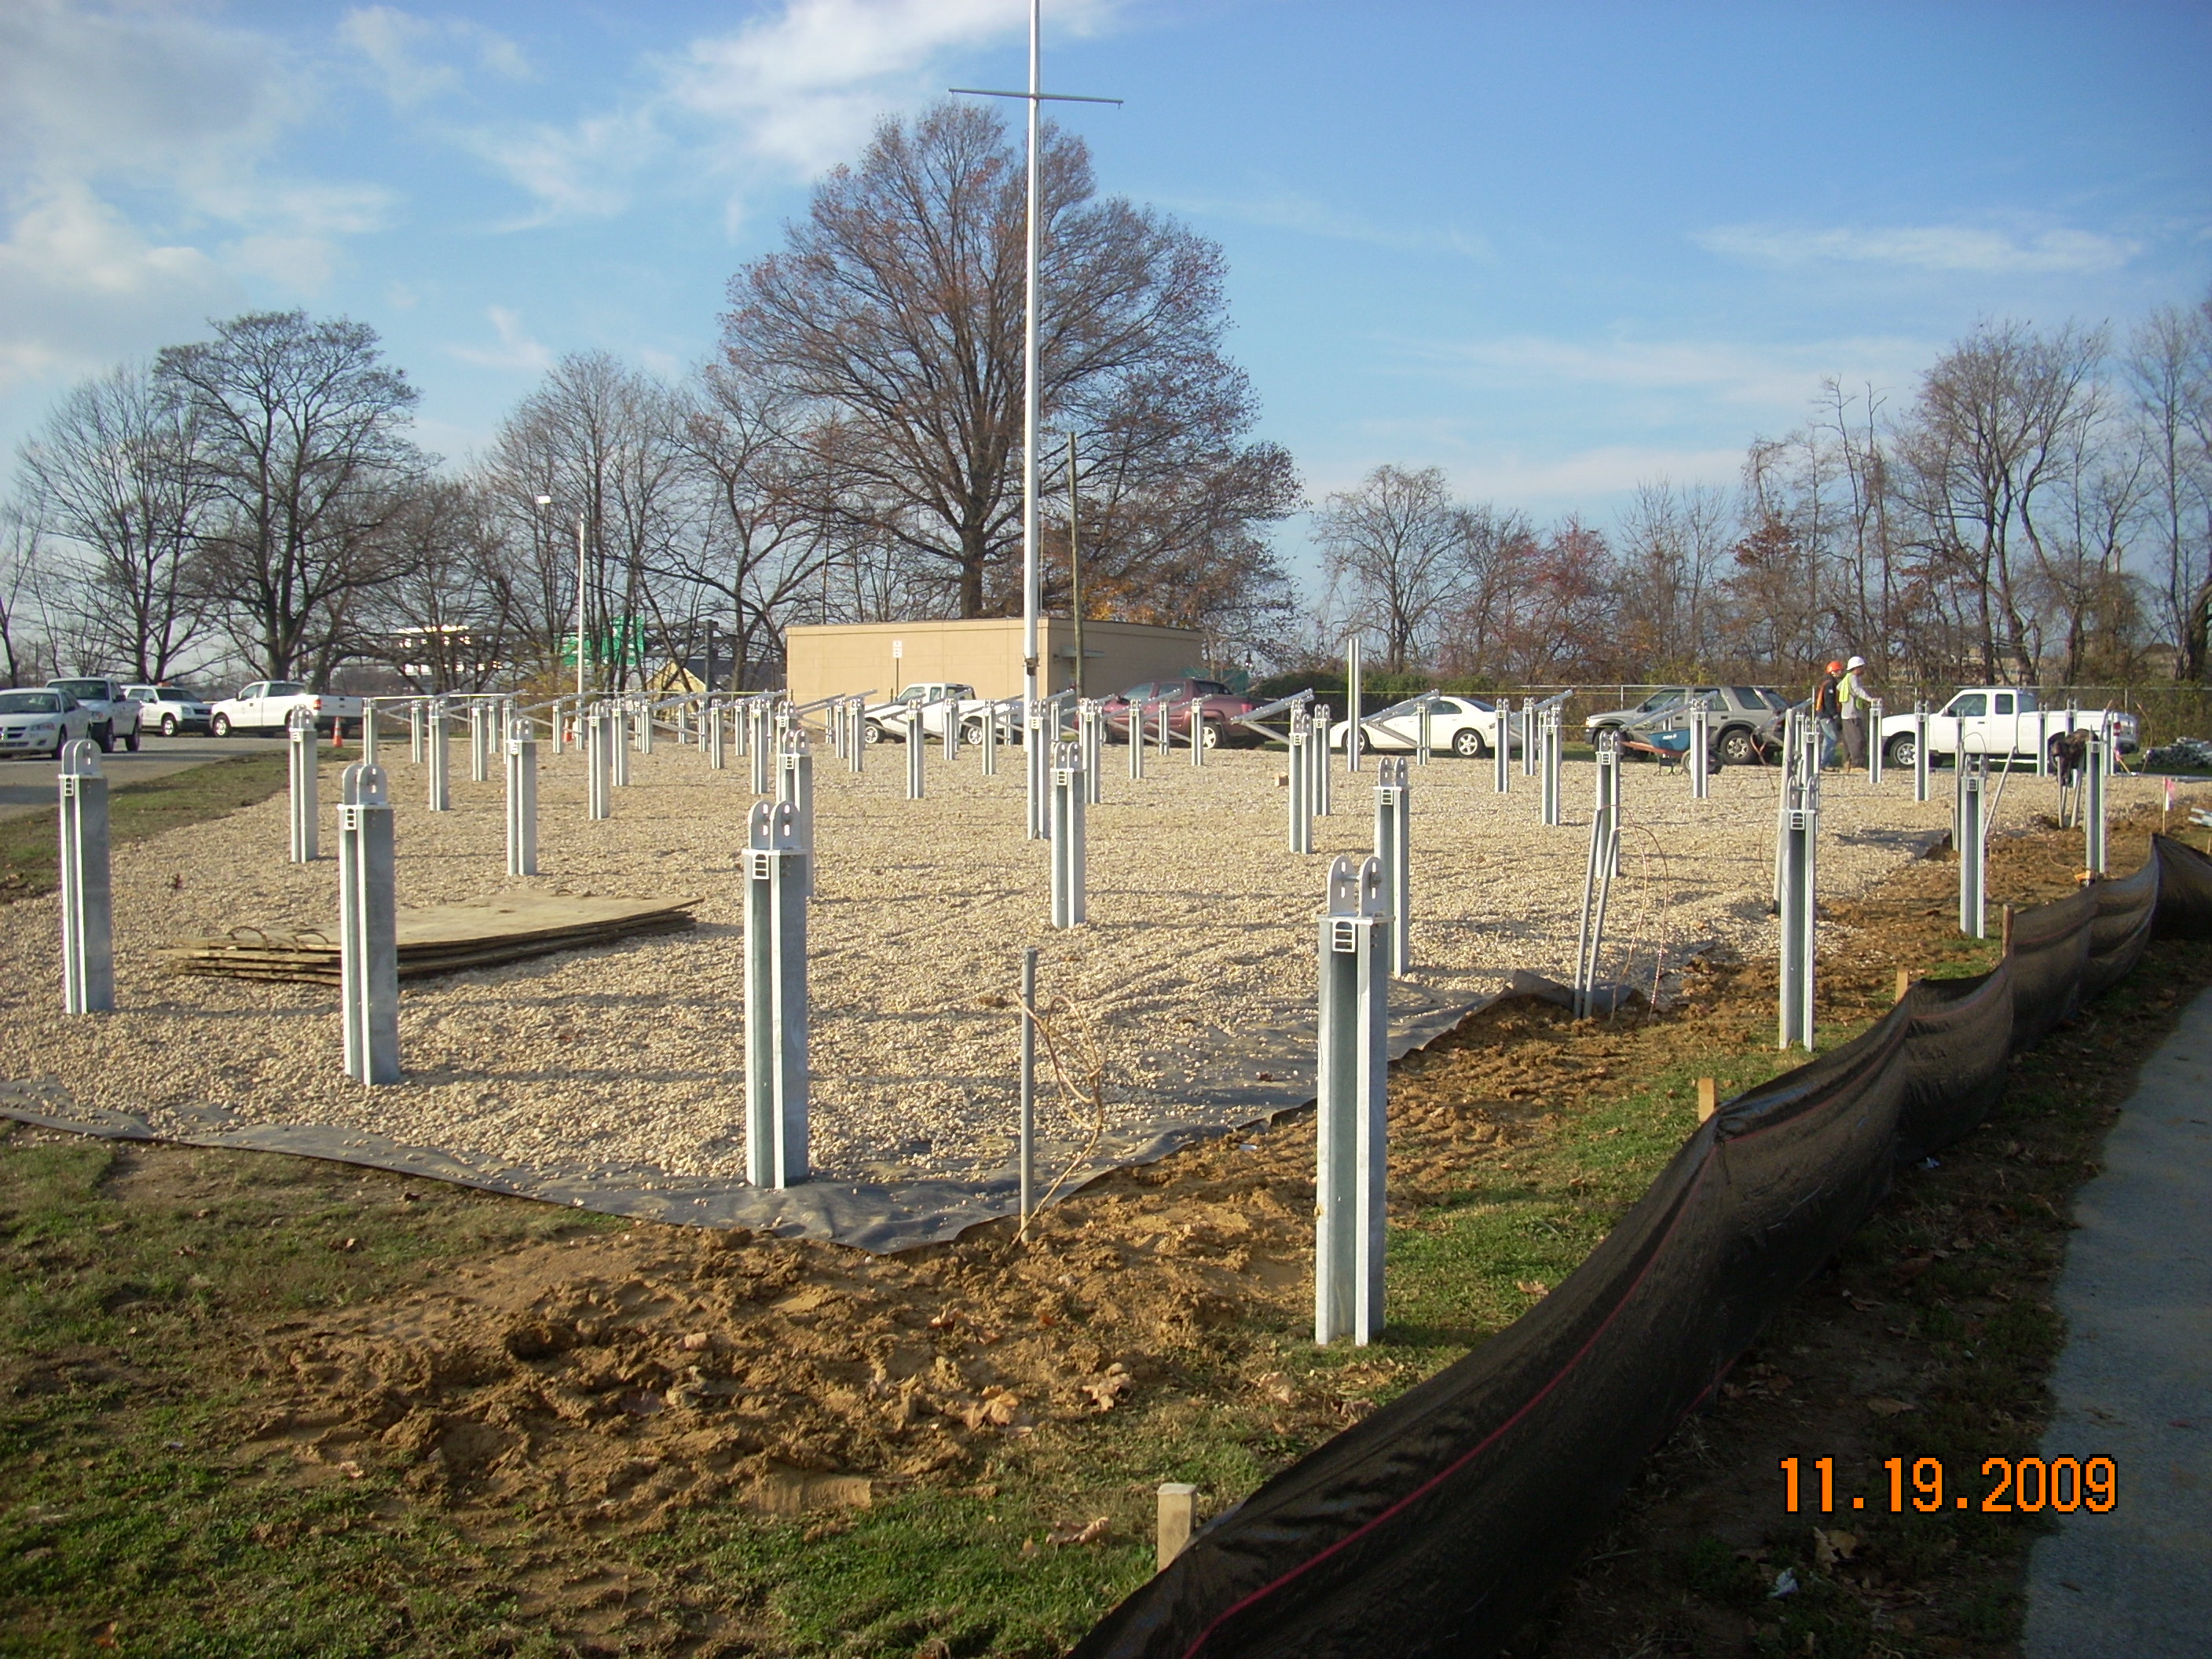 Pilings awaiting installation of solarpanels.